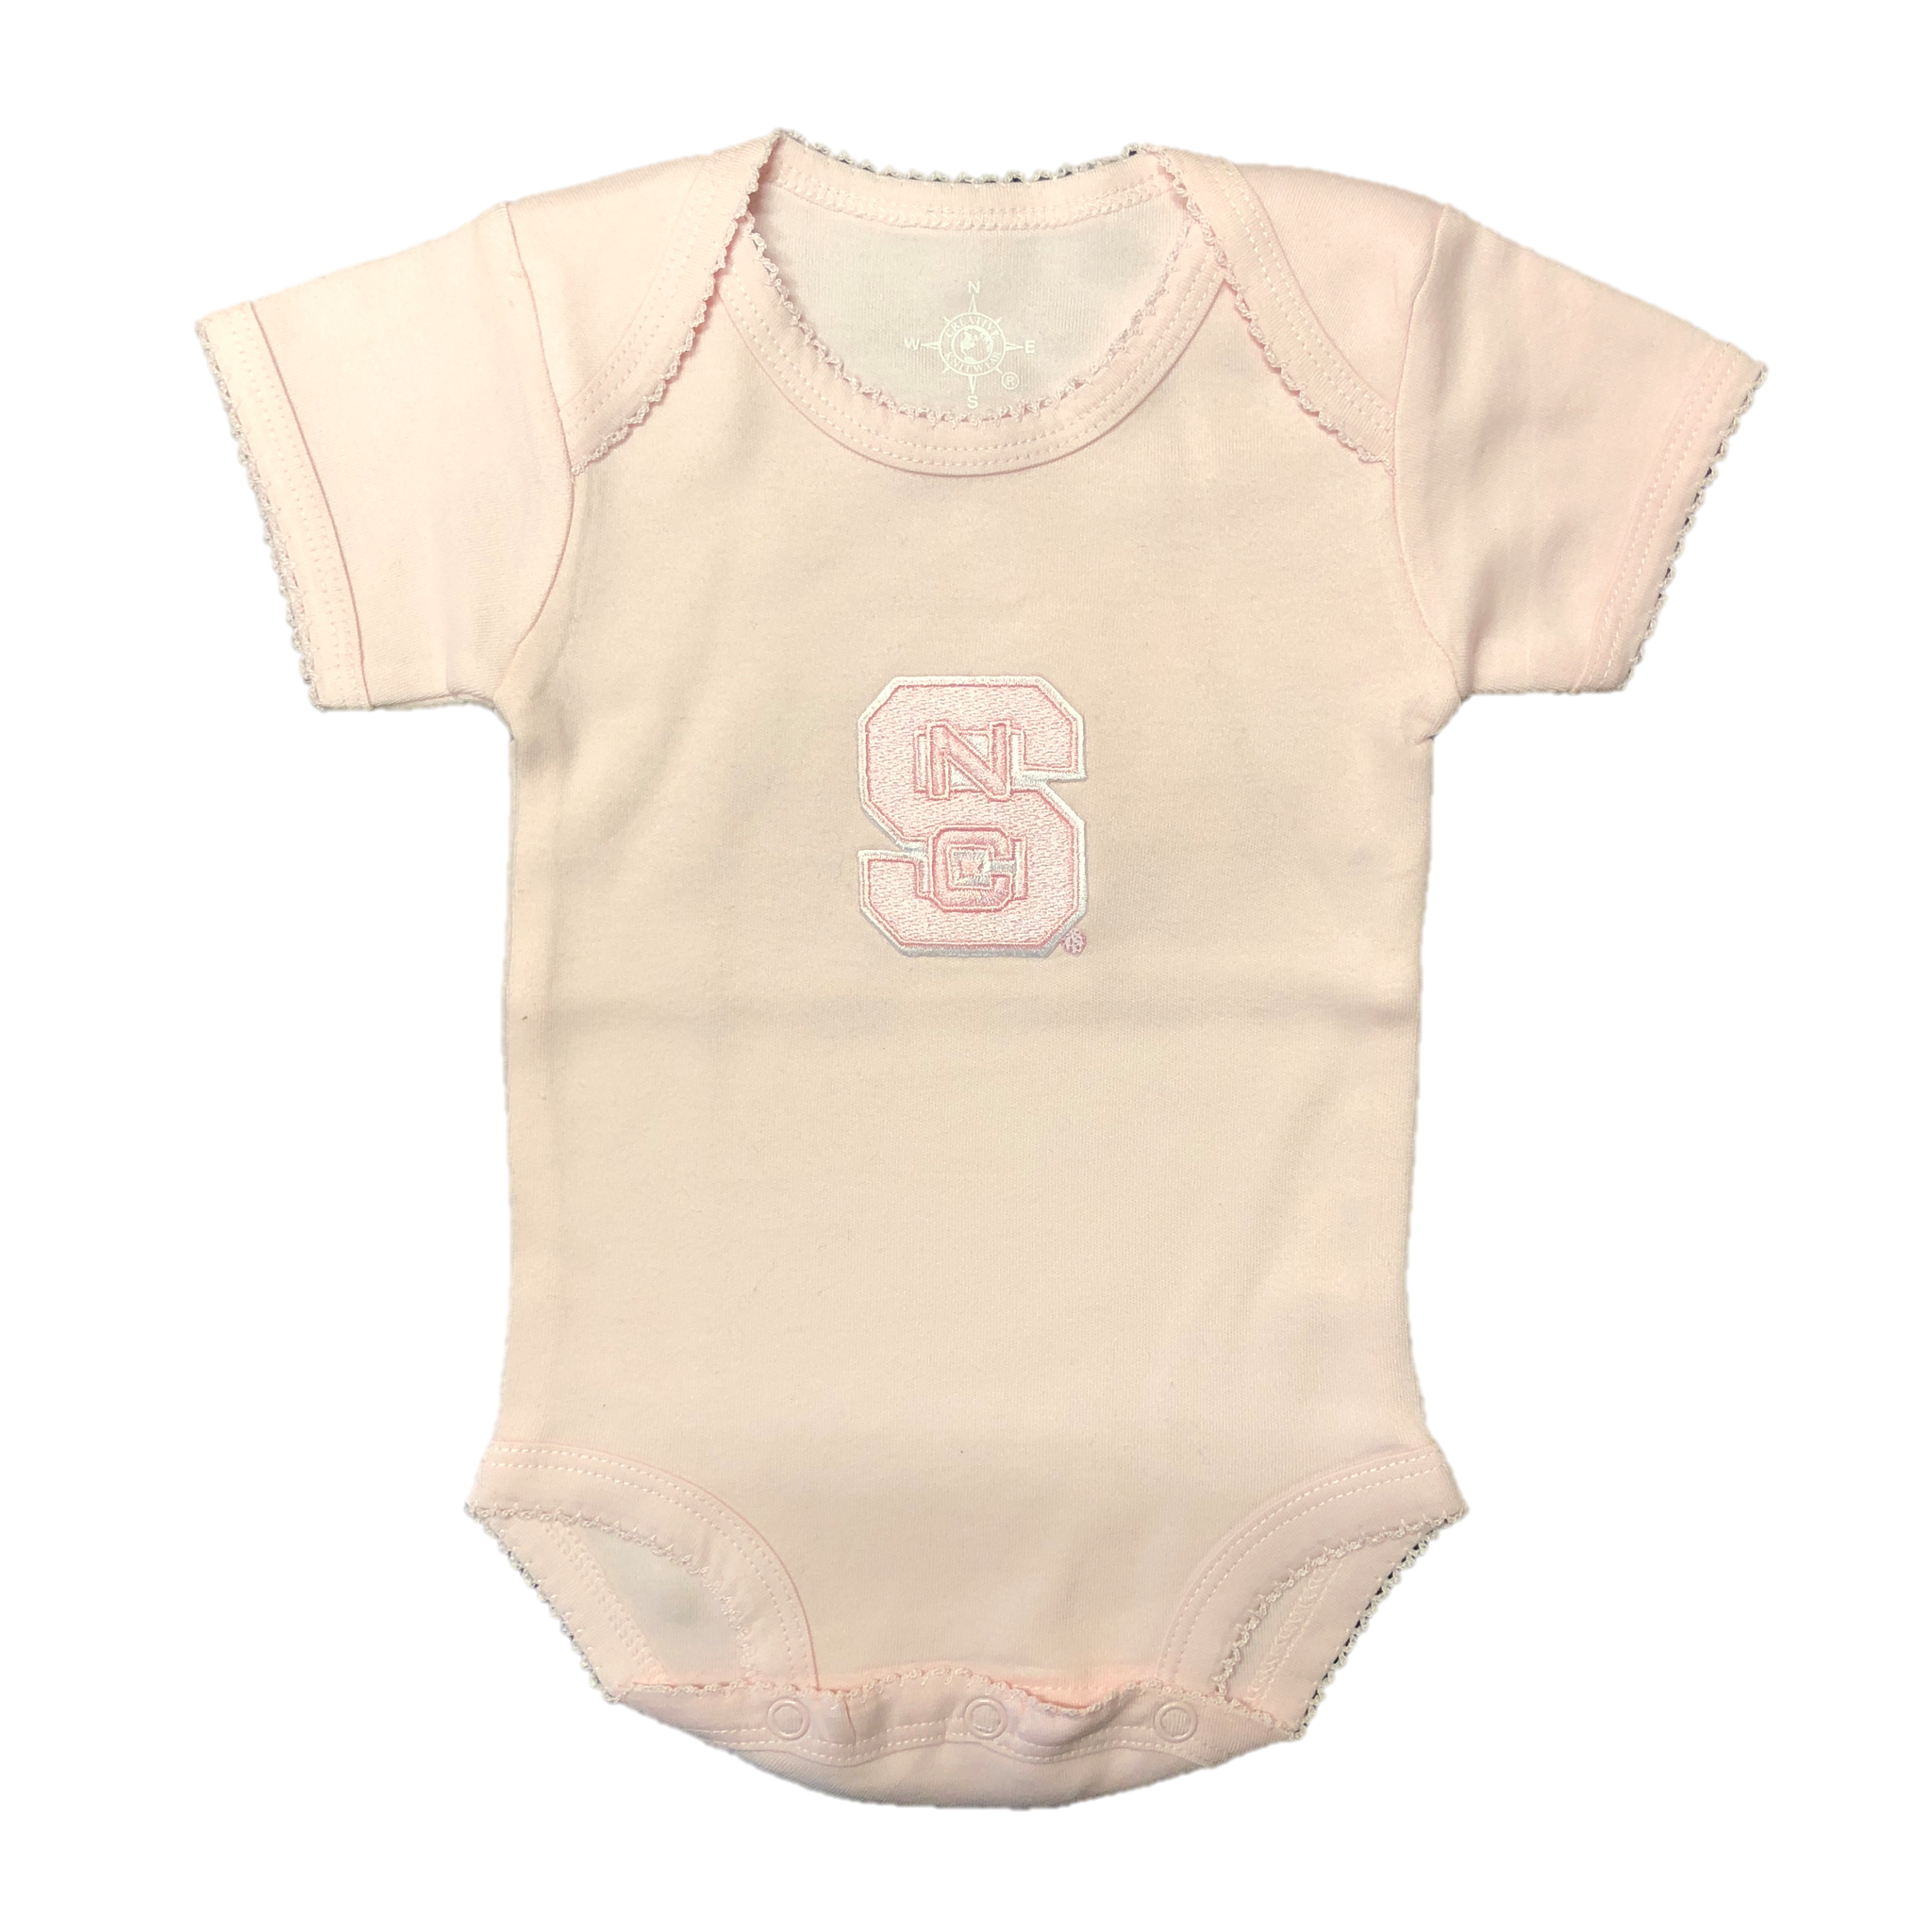 NC State Wolfpack Infant Pink Picot Onesie